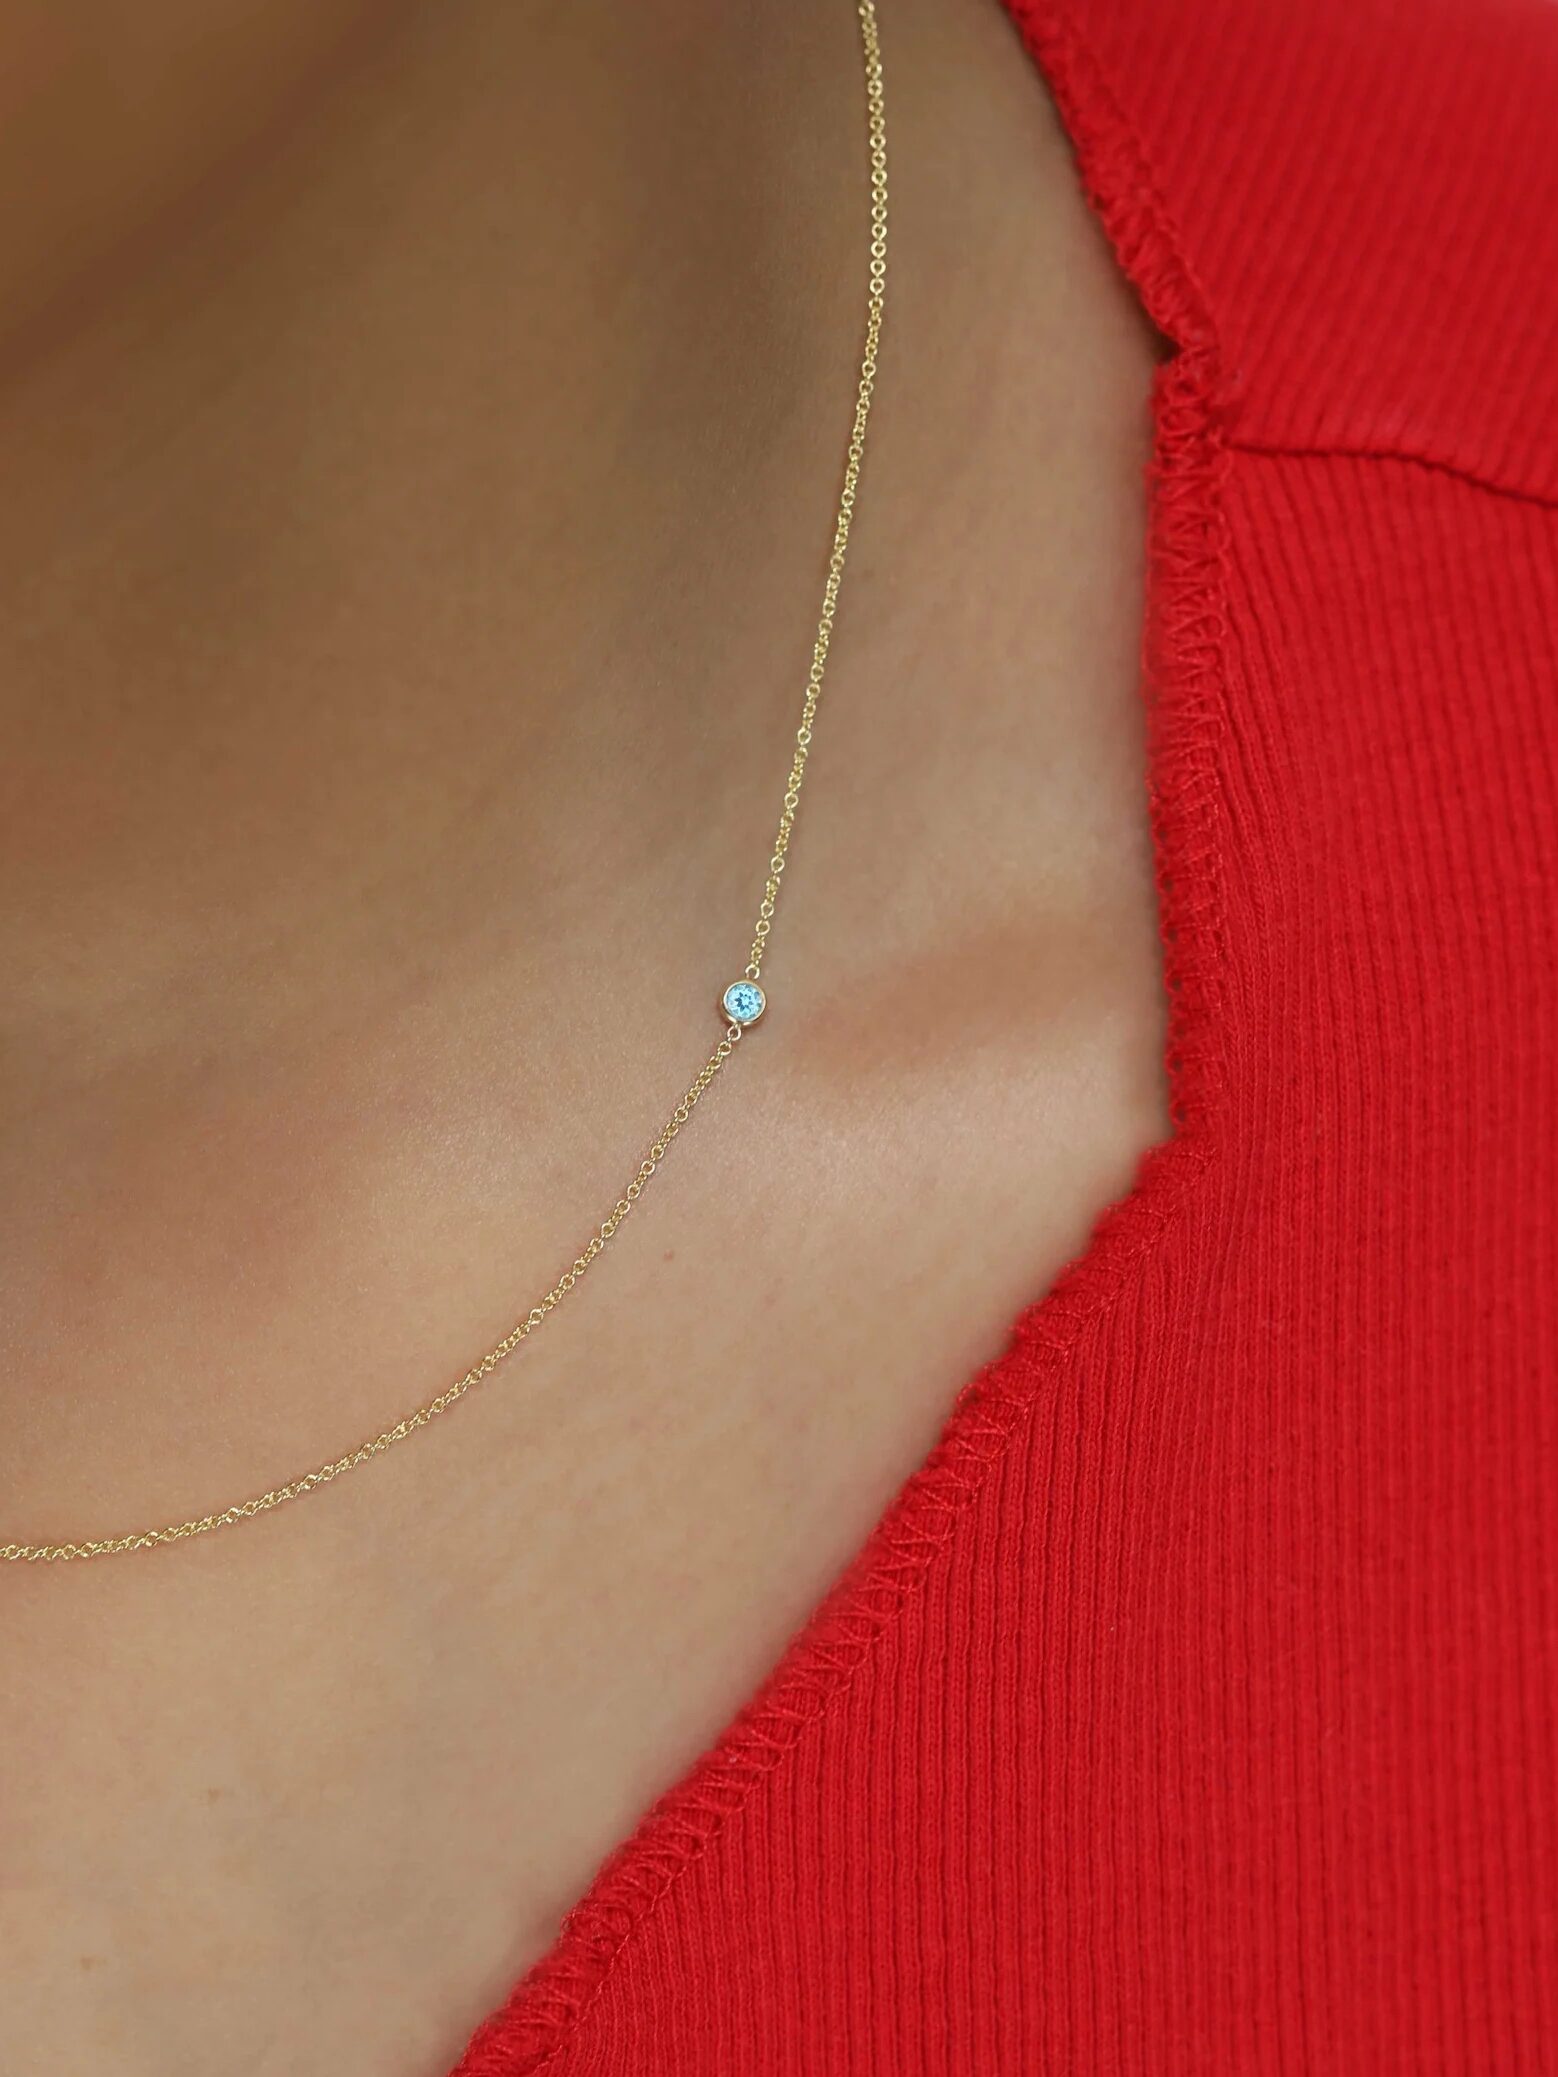 Close-up of a person wearing a gold chain necklace with a small pendant against a red top.